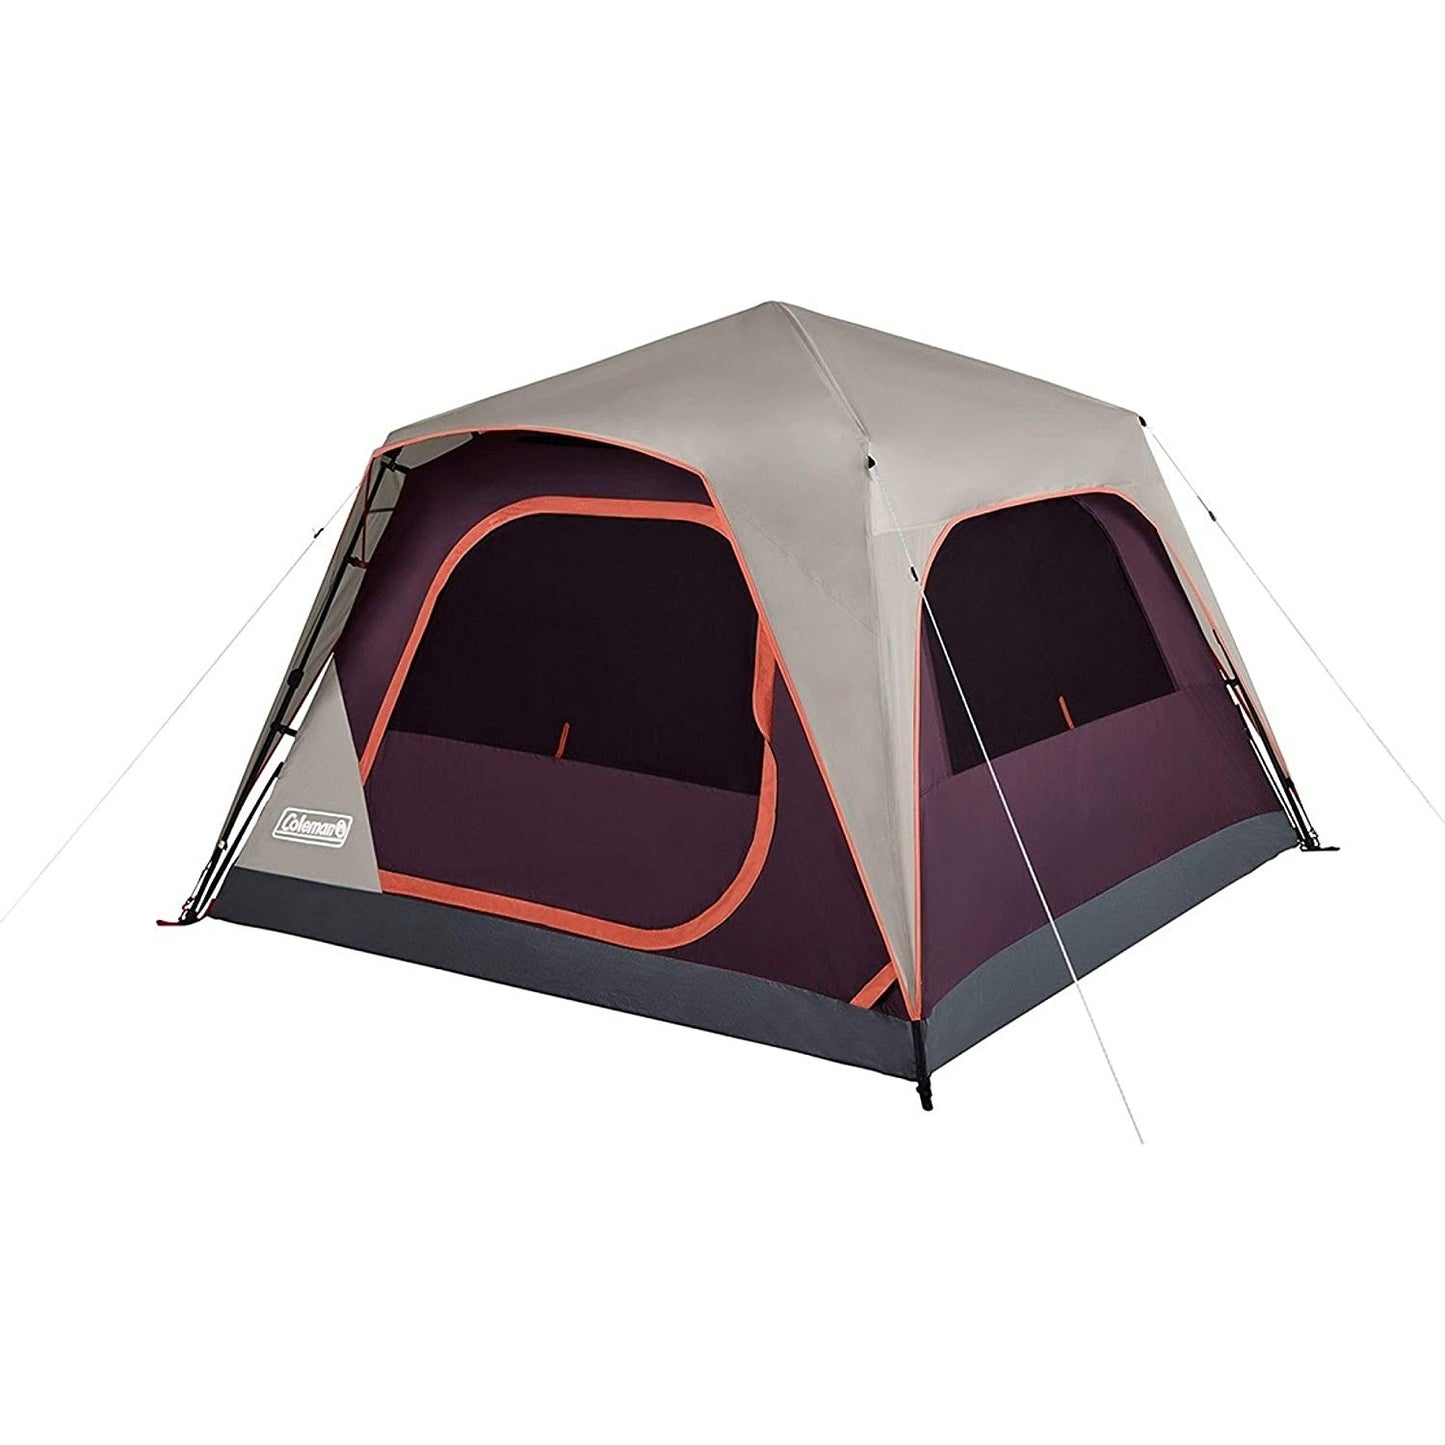 Skylodge™ 4-Person Instant Camping Tent, Blackberry